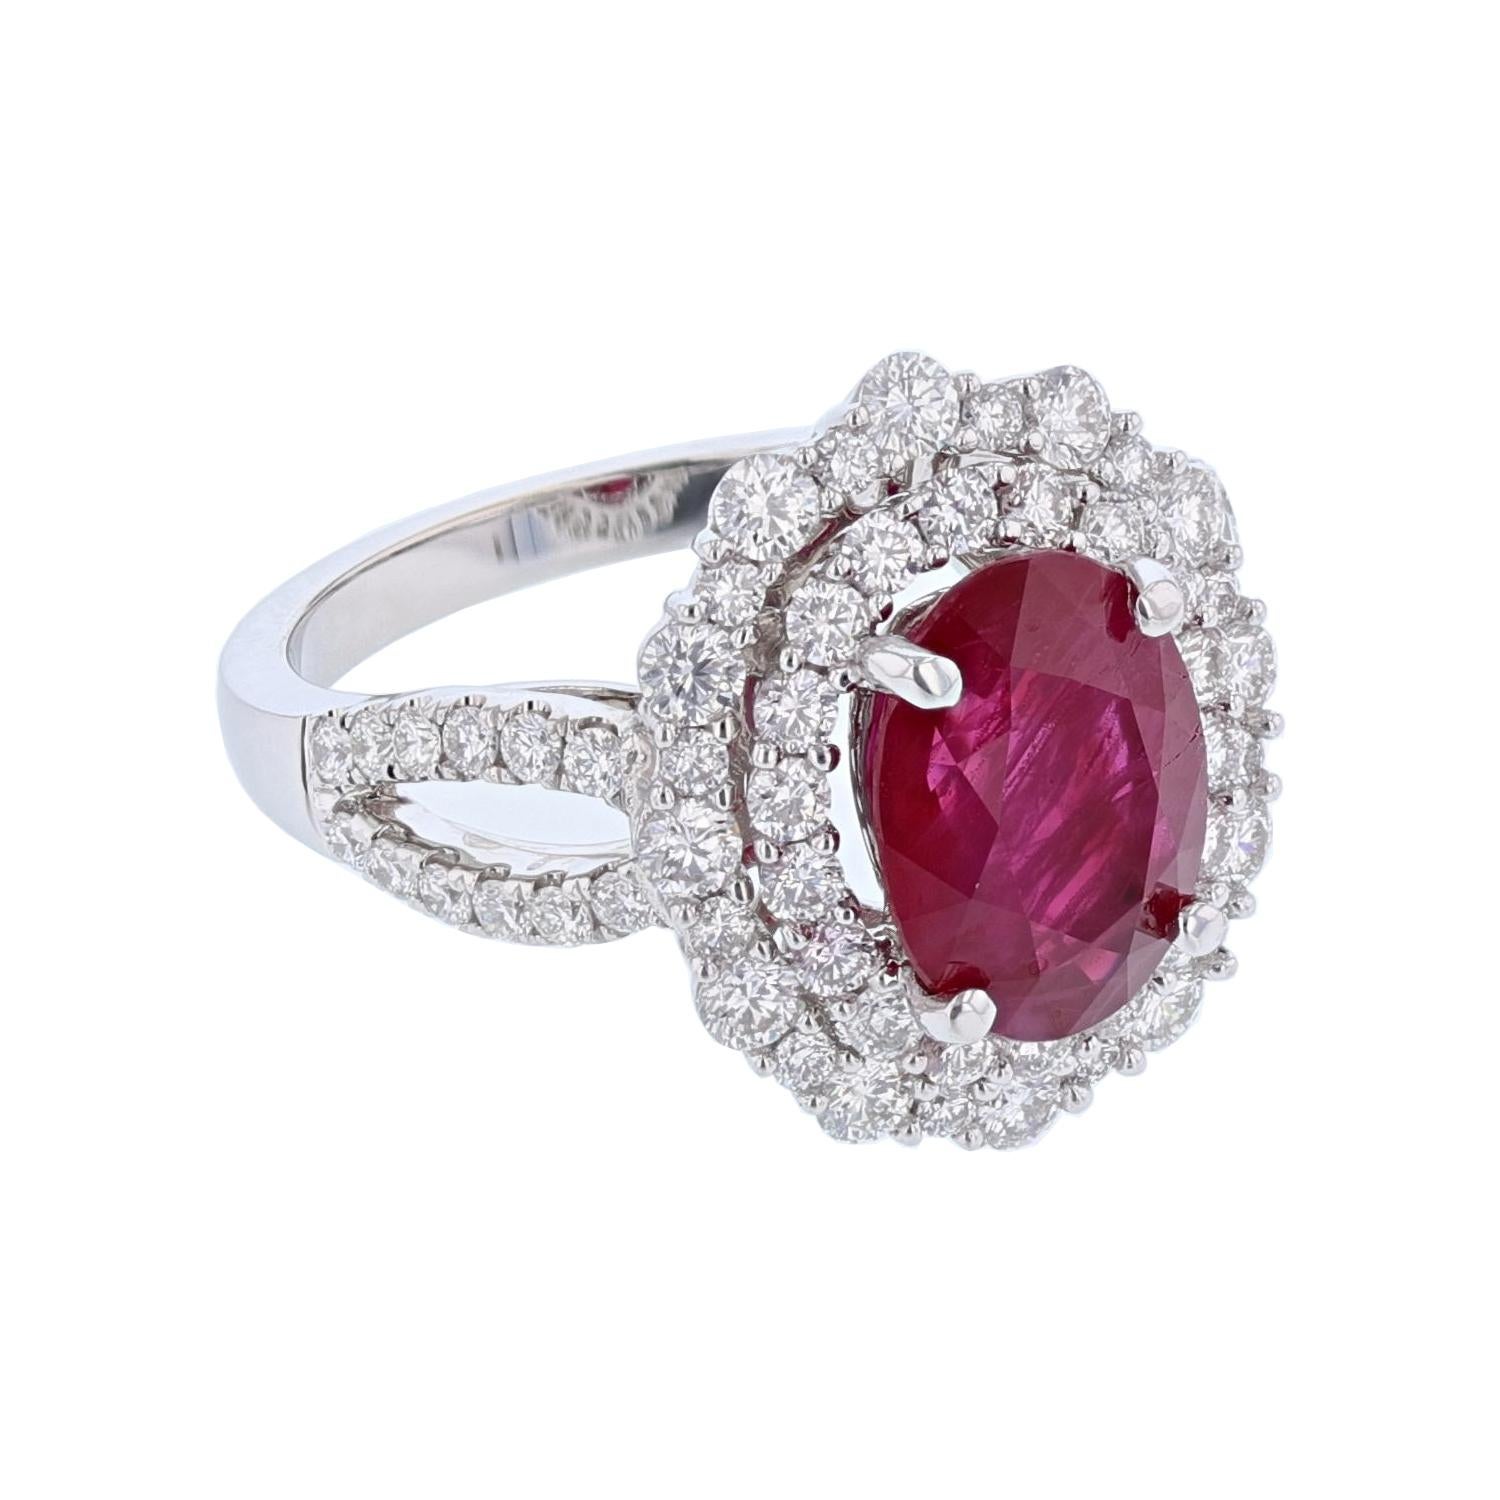 This ring is made in 18k white gold and features a 3.06ct Oval Shape Natural Corundum Burmese Ruby with a GIA certificate. The certificate number is 